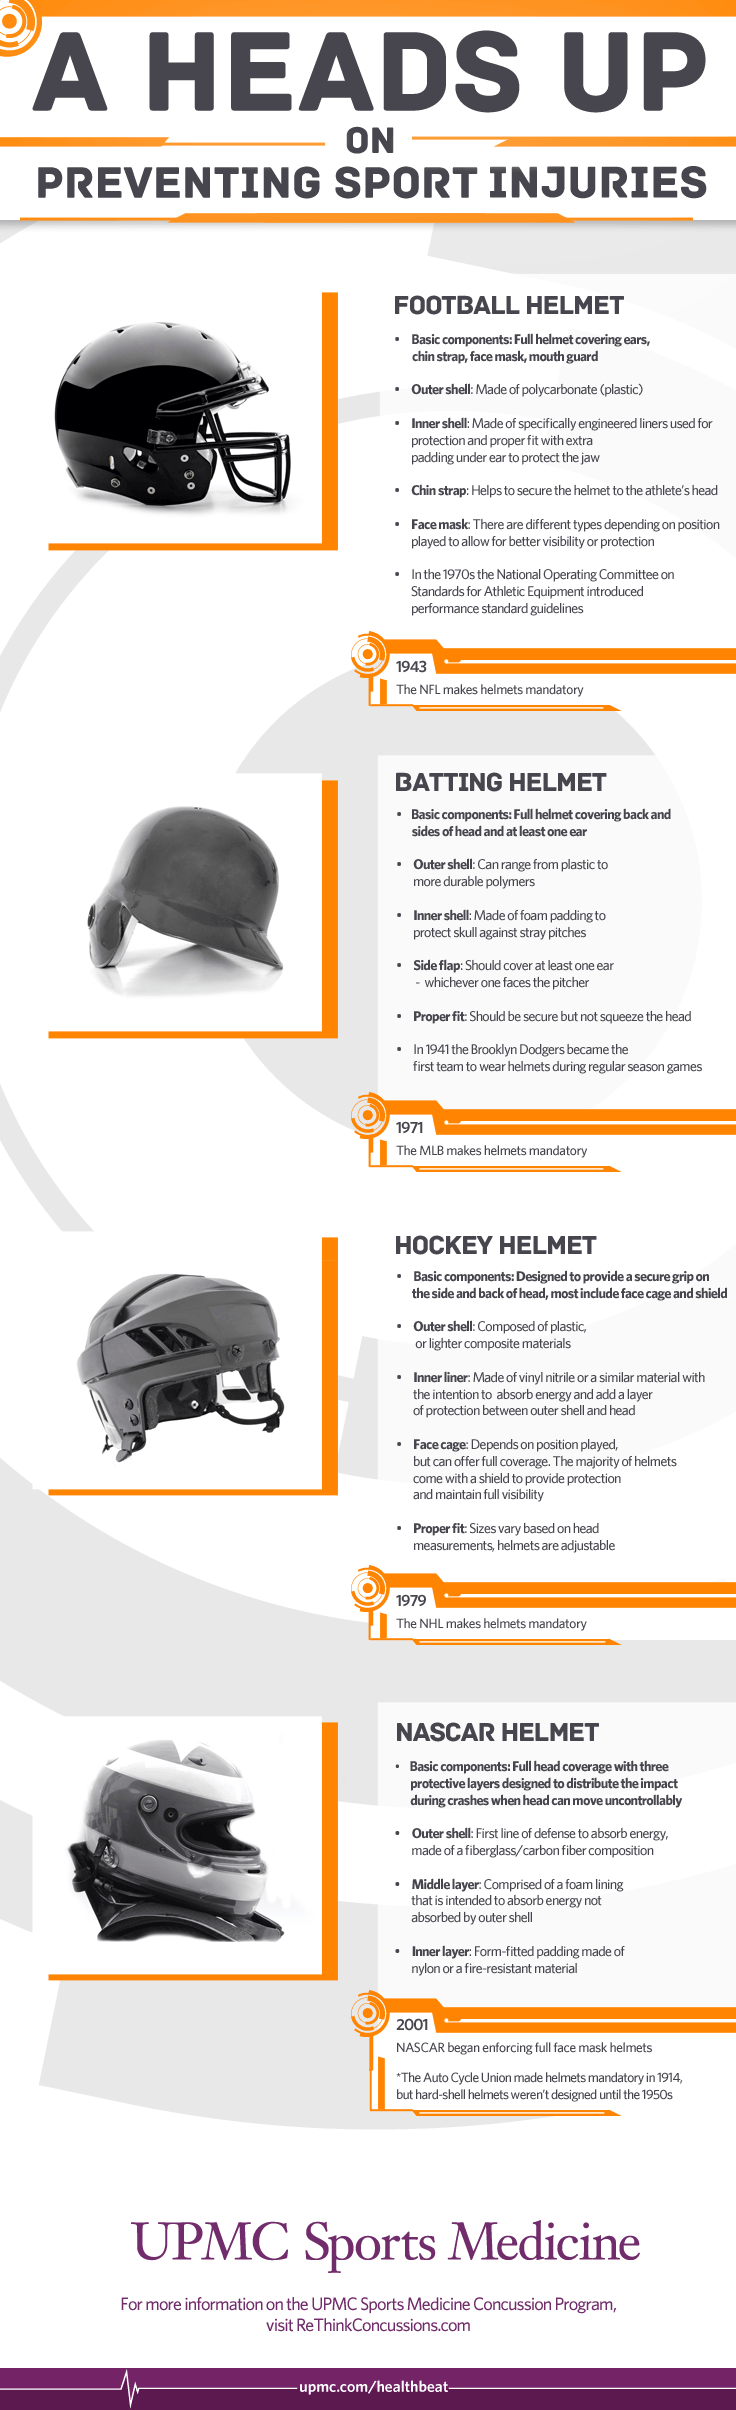 helmets and concussion